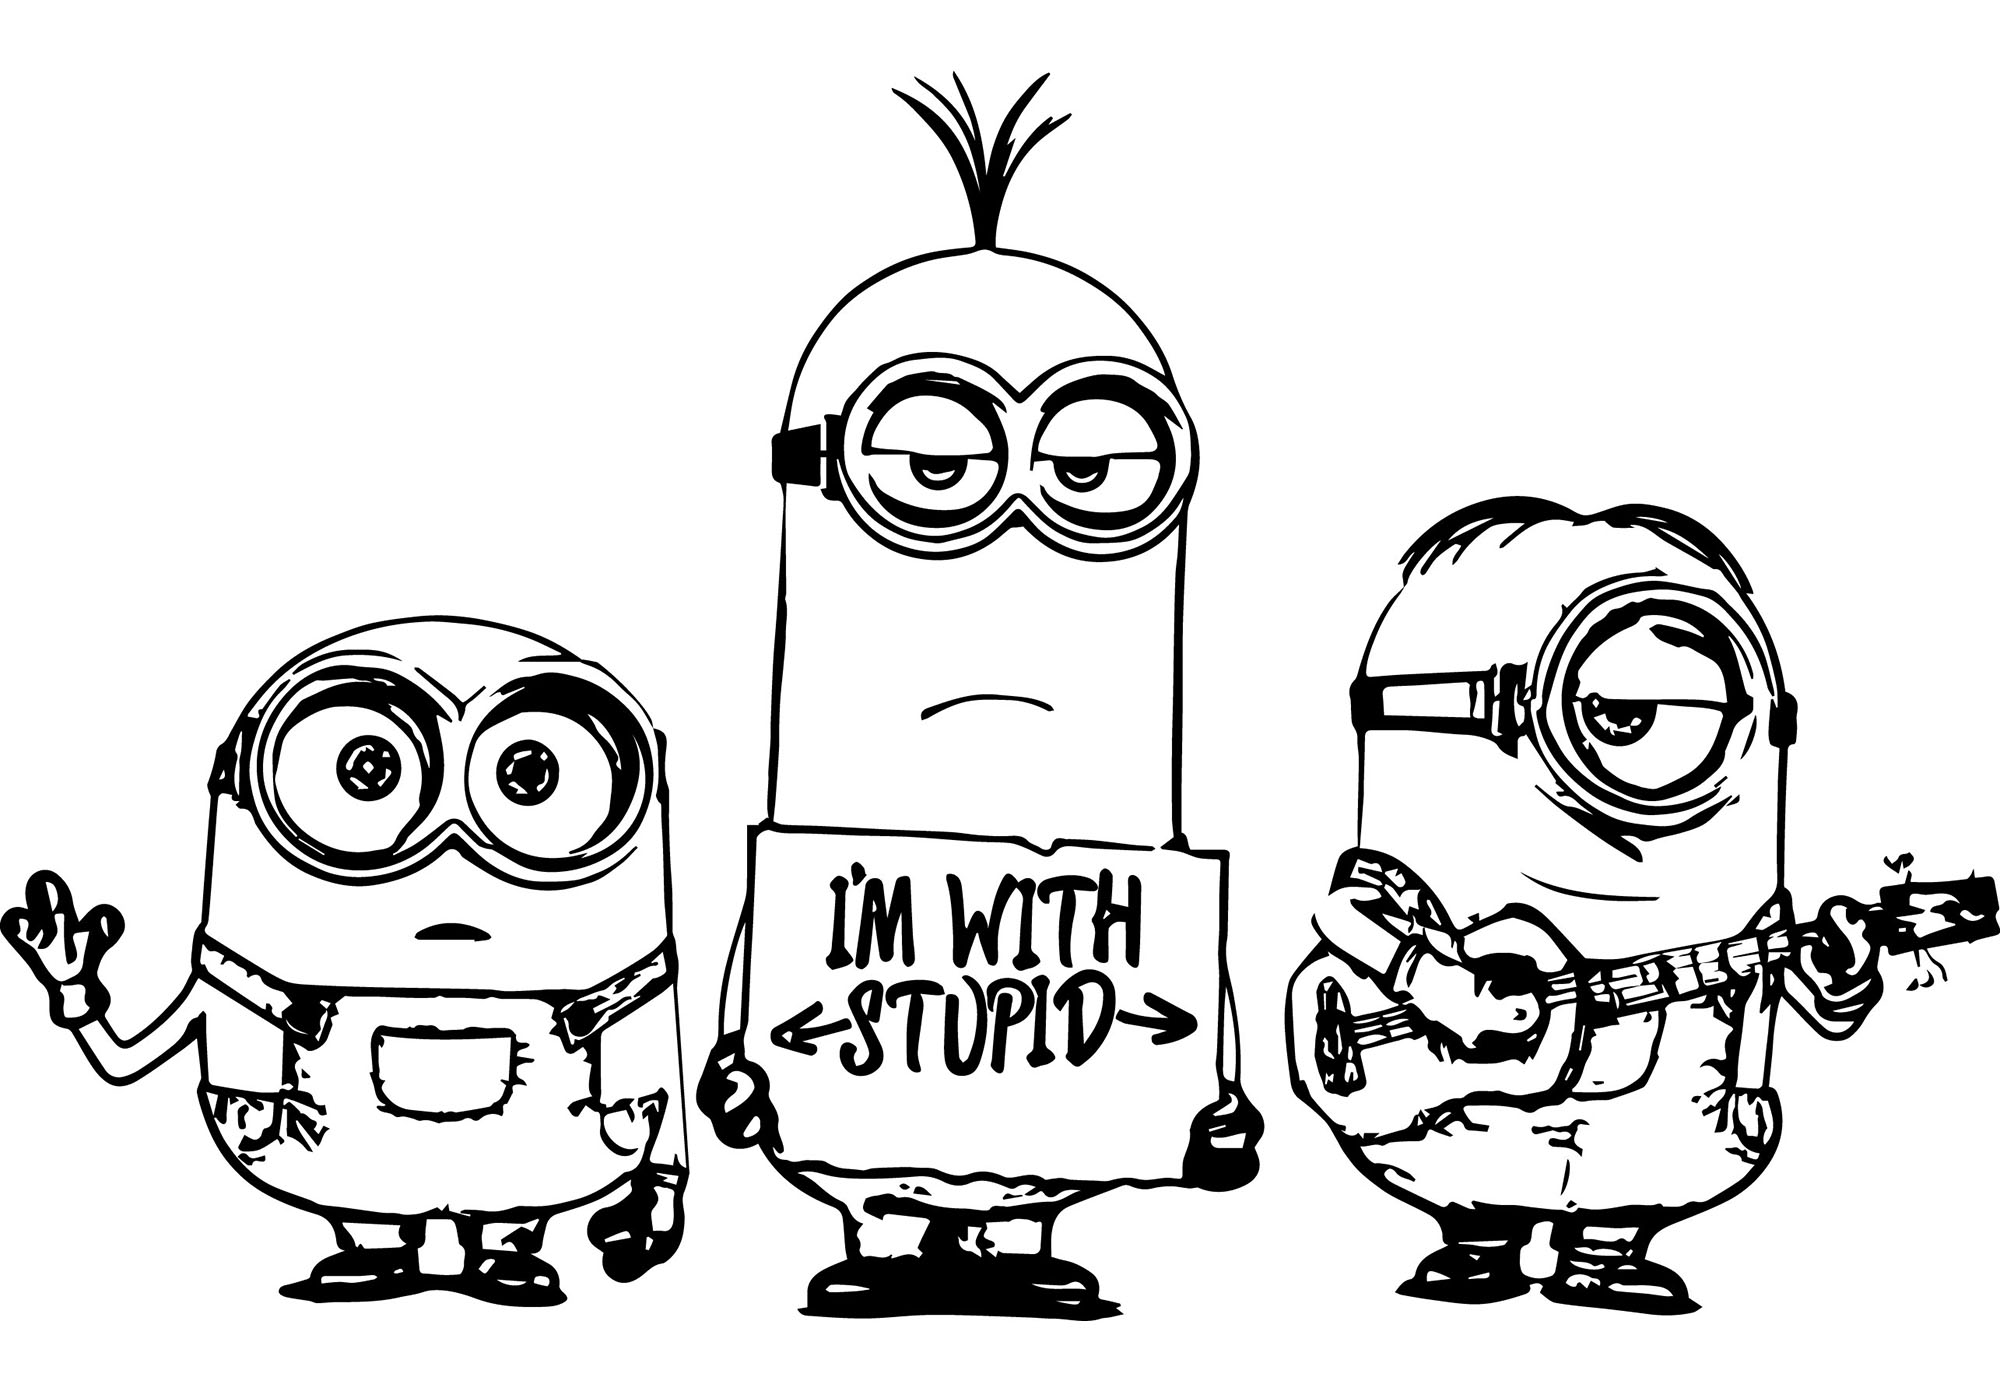 carl minion coloring pages